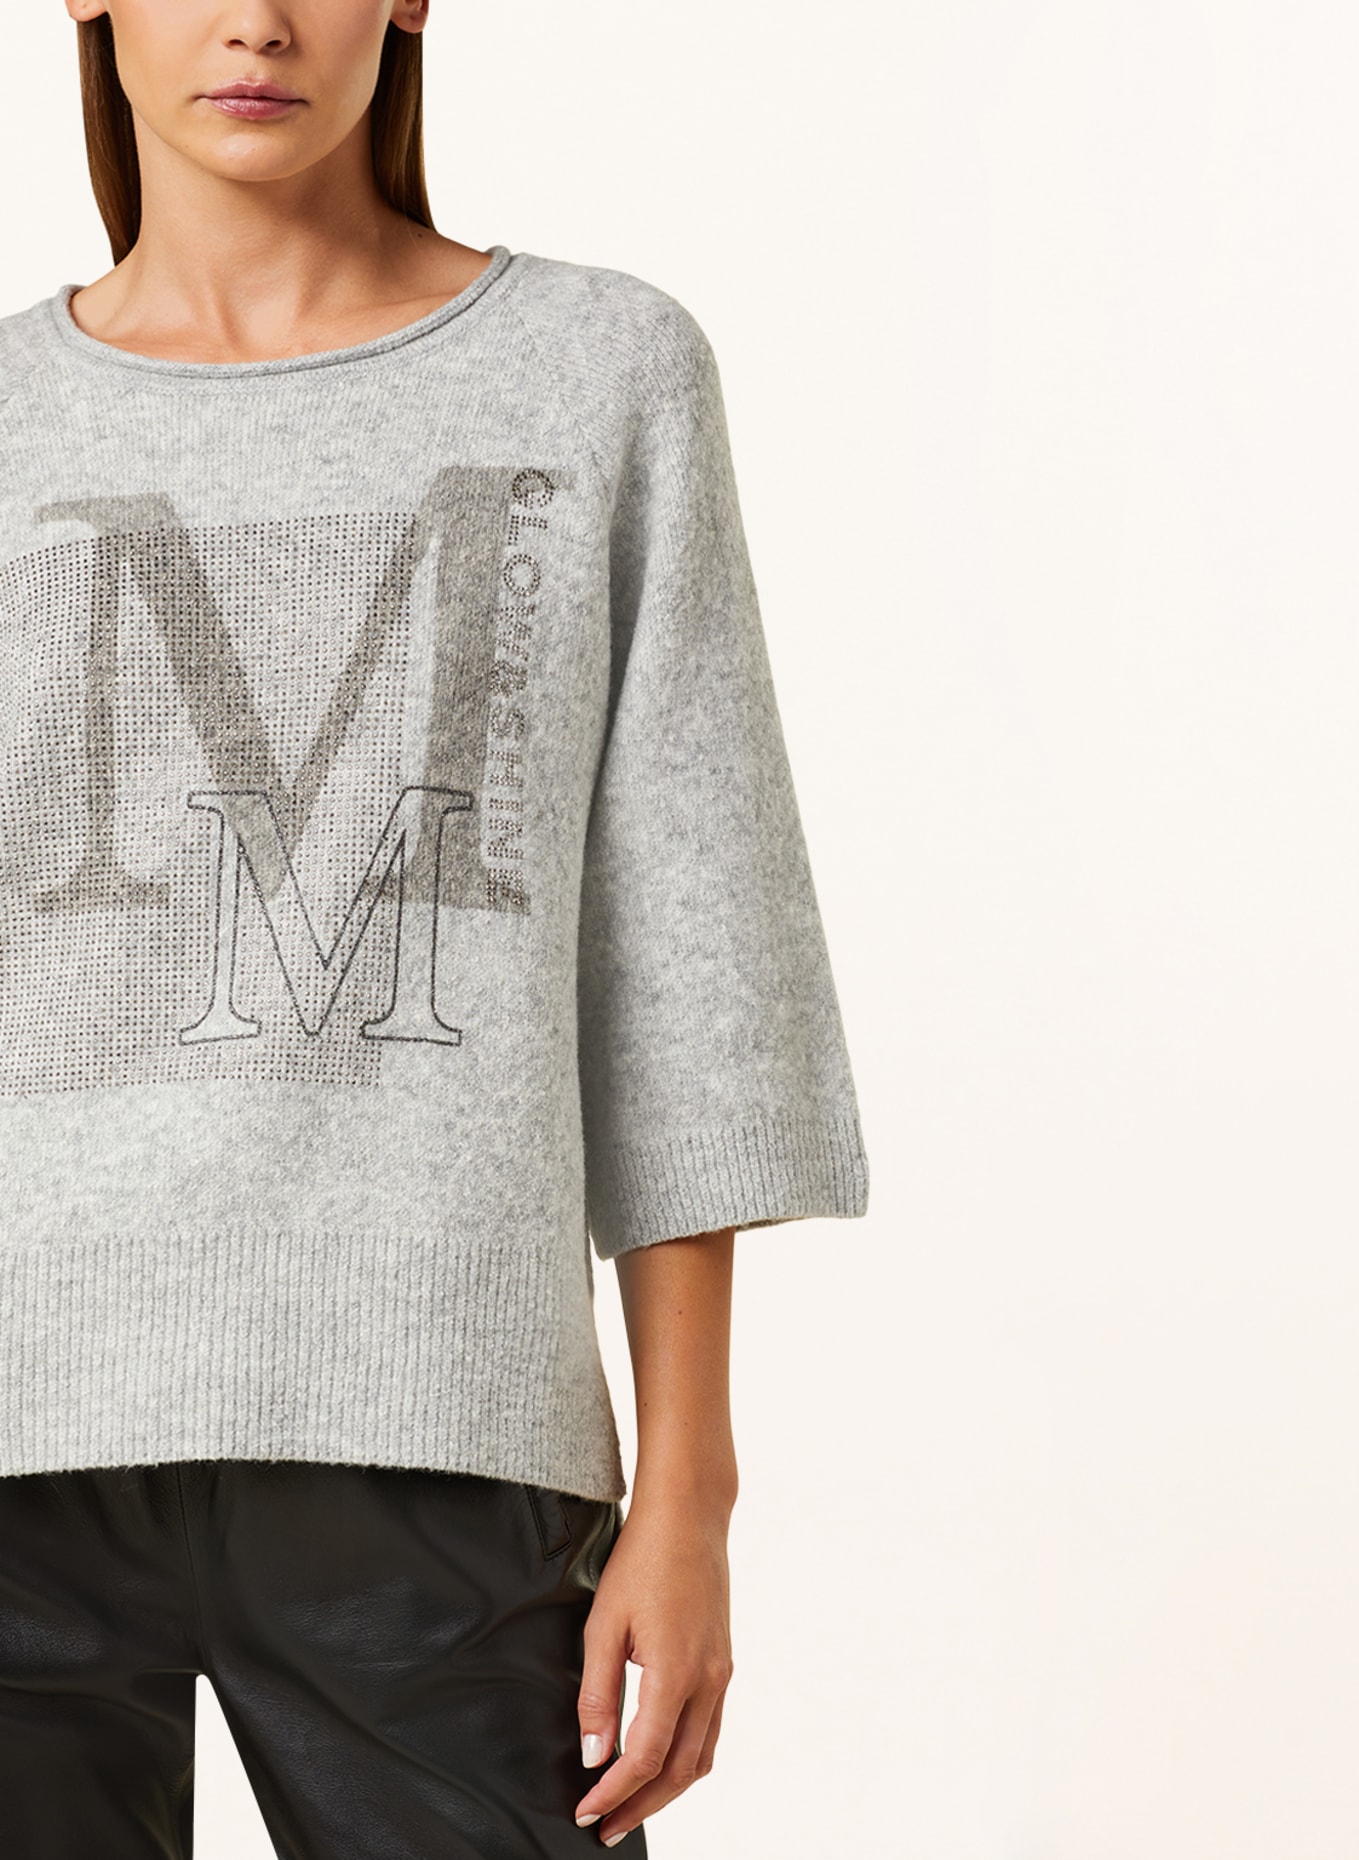 monari Sweater with 3/4 sleeves and decorative gems, Color: GRAY (Image 4)